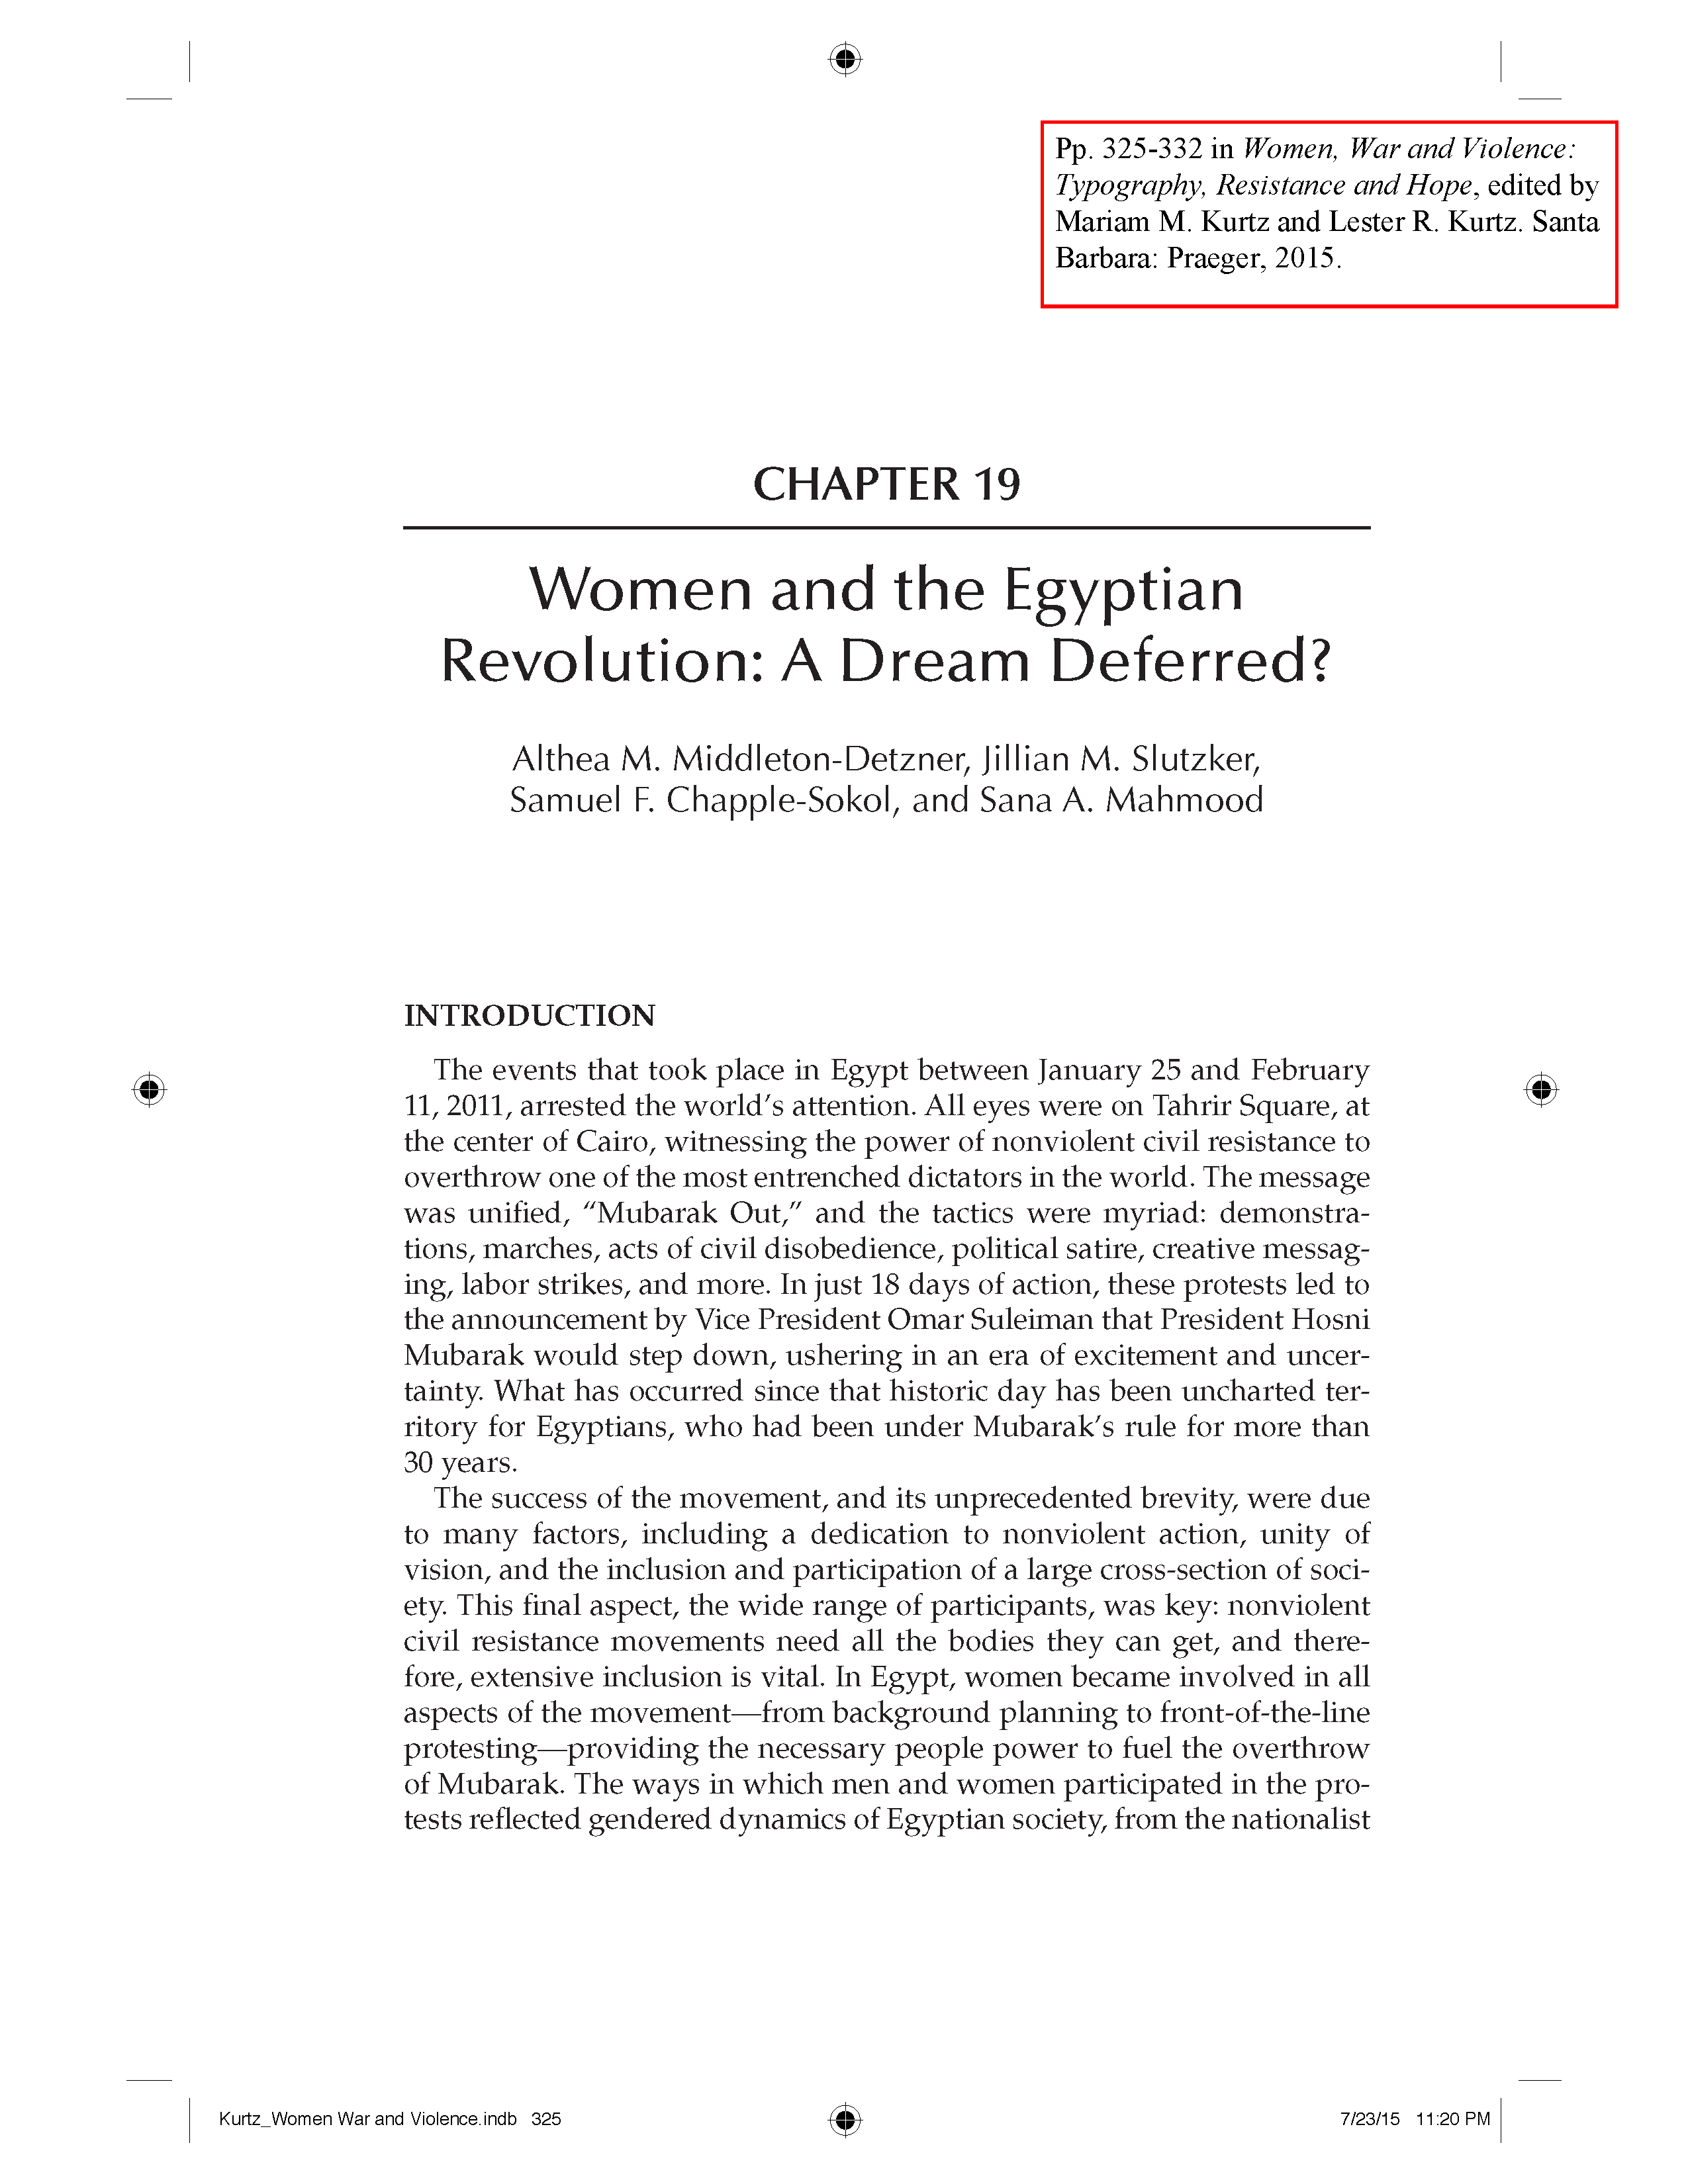 Women and the Egyptian Revolution: A Dream Deferred?